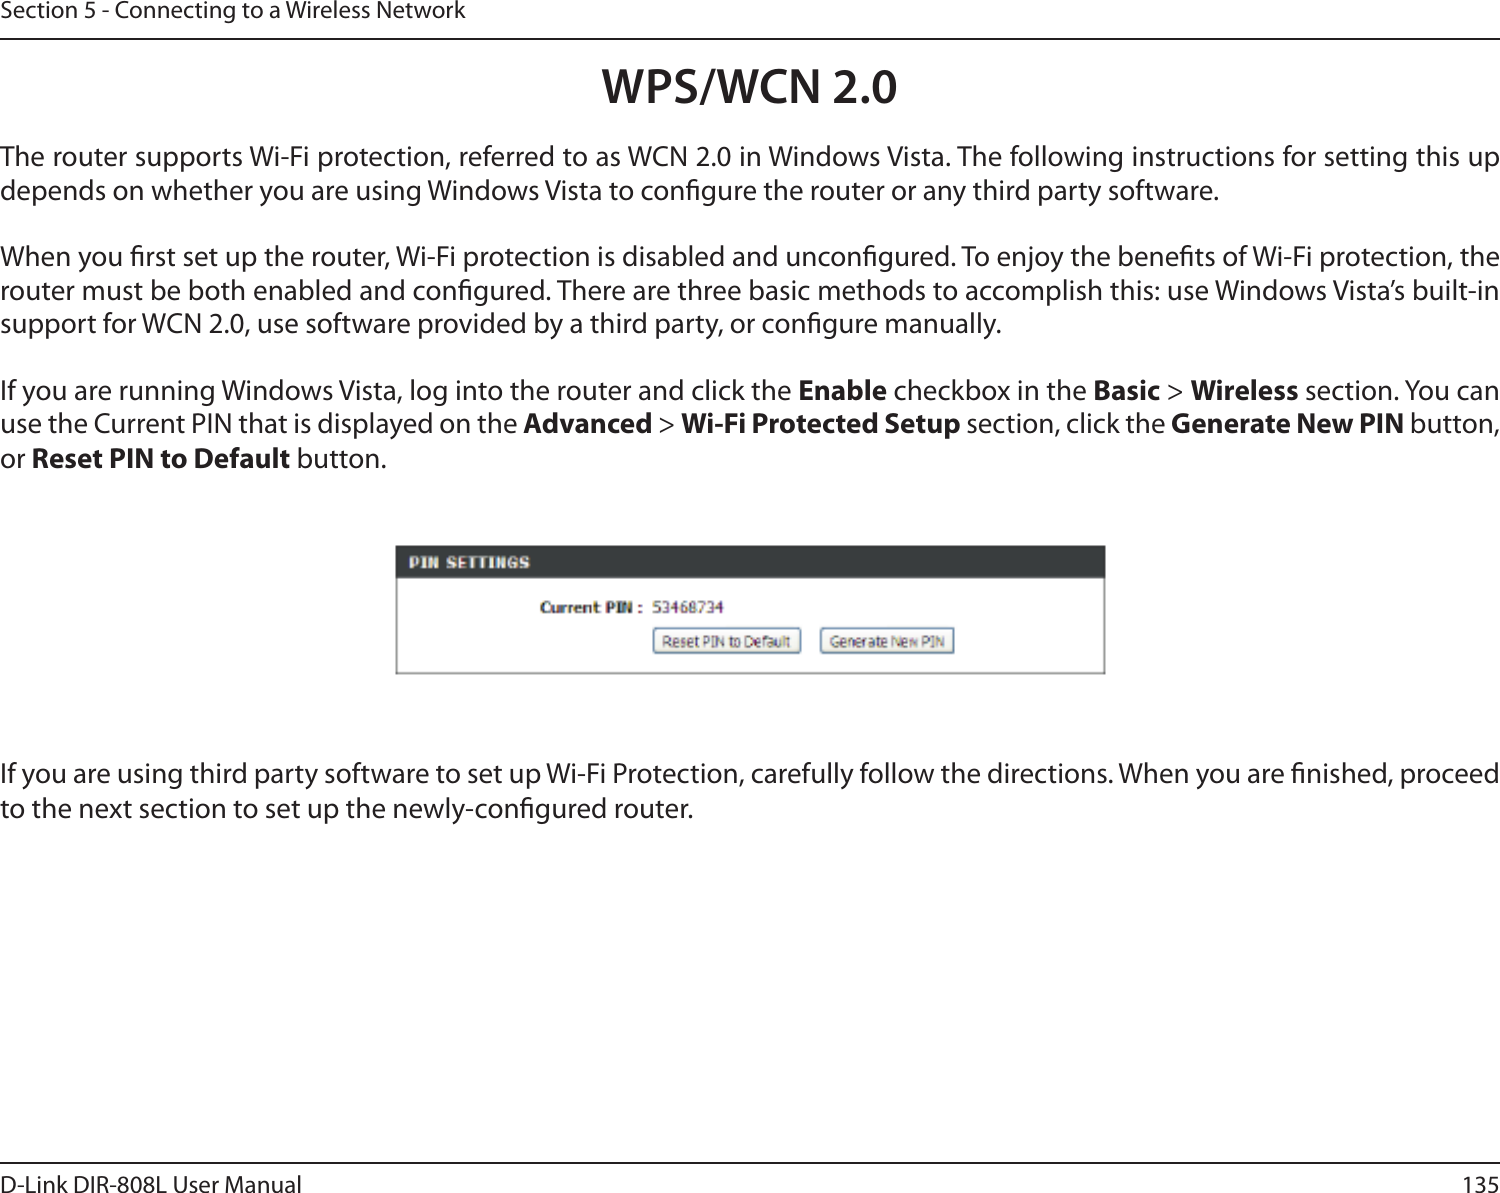 135D-Link DIR-808L User ManualSection 5 - Connecting to a Wireless NetworkWPS/WCN 2.0The router supports Wi-Fi protection, referred to as WCN 2.0 in Windows Vista. The following instructions for setting this up depends on whether you are using Windows Vista to congure the router or any third party software.        When you rst set up the router, Wi-Fi protection is disabled and uncongured. To enjoy the benets of Wi-Fi protection, the router must be both enabled and congured. There are three basic methods to accomplish this: use Windows Vista’s built-in support for WCN 2.0, use software provided by a third party, or congure manually. If you are running Windows Vista, log into the router and click the Enable checkbox in the Basic &gt; Wireless section. You can use the Current PIN that is displayed on the Advanced &gt; Wi-Fi Protected Setup section, click the Generate New PIN button, or Reset PIN to Default button. If you are using third party software to set up Wi-Fi Protection, carefully follow the directions. When you are nished, proceed to the next section to set up the newly-congured router. 